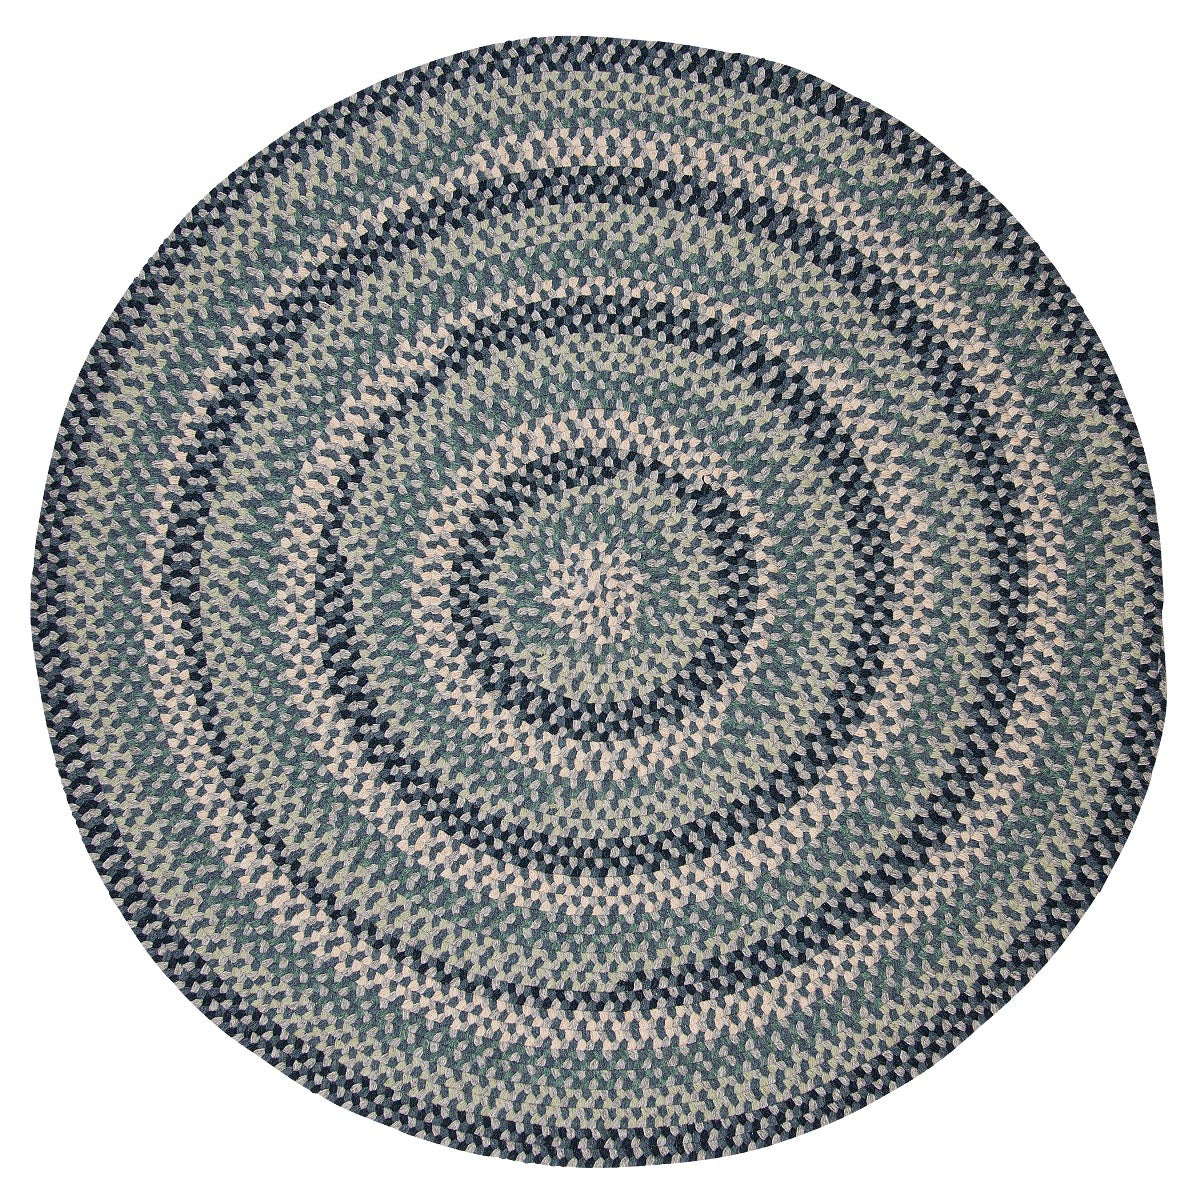 Boston Common Capeside Blue Outdoor Braided Round Rugs